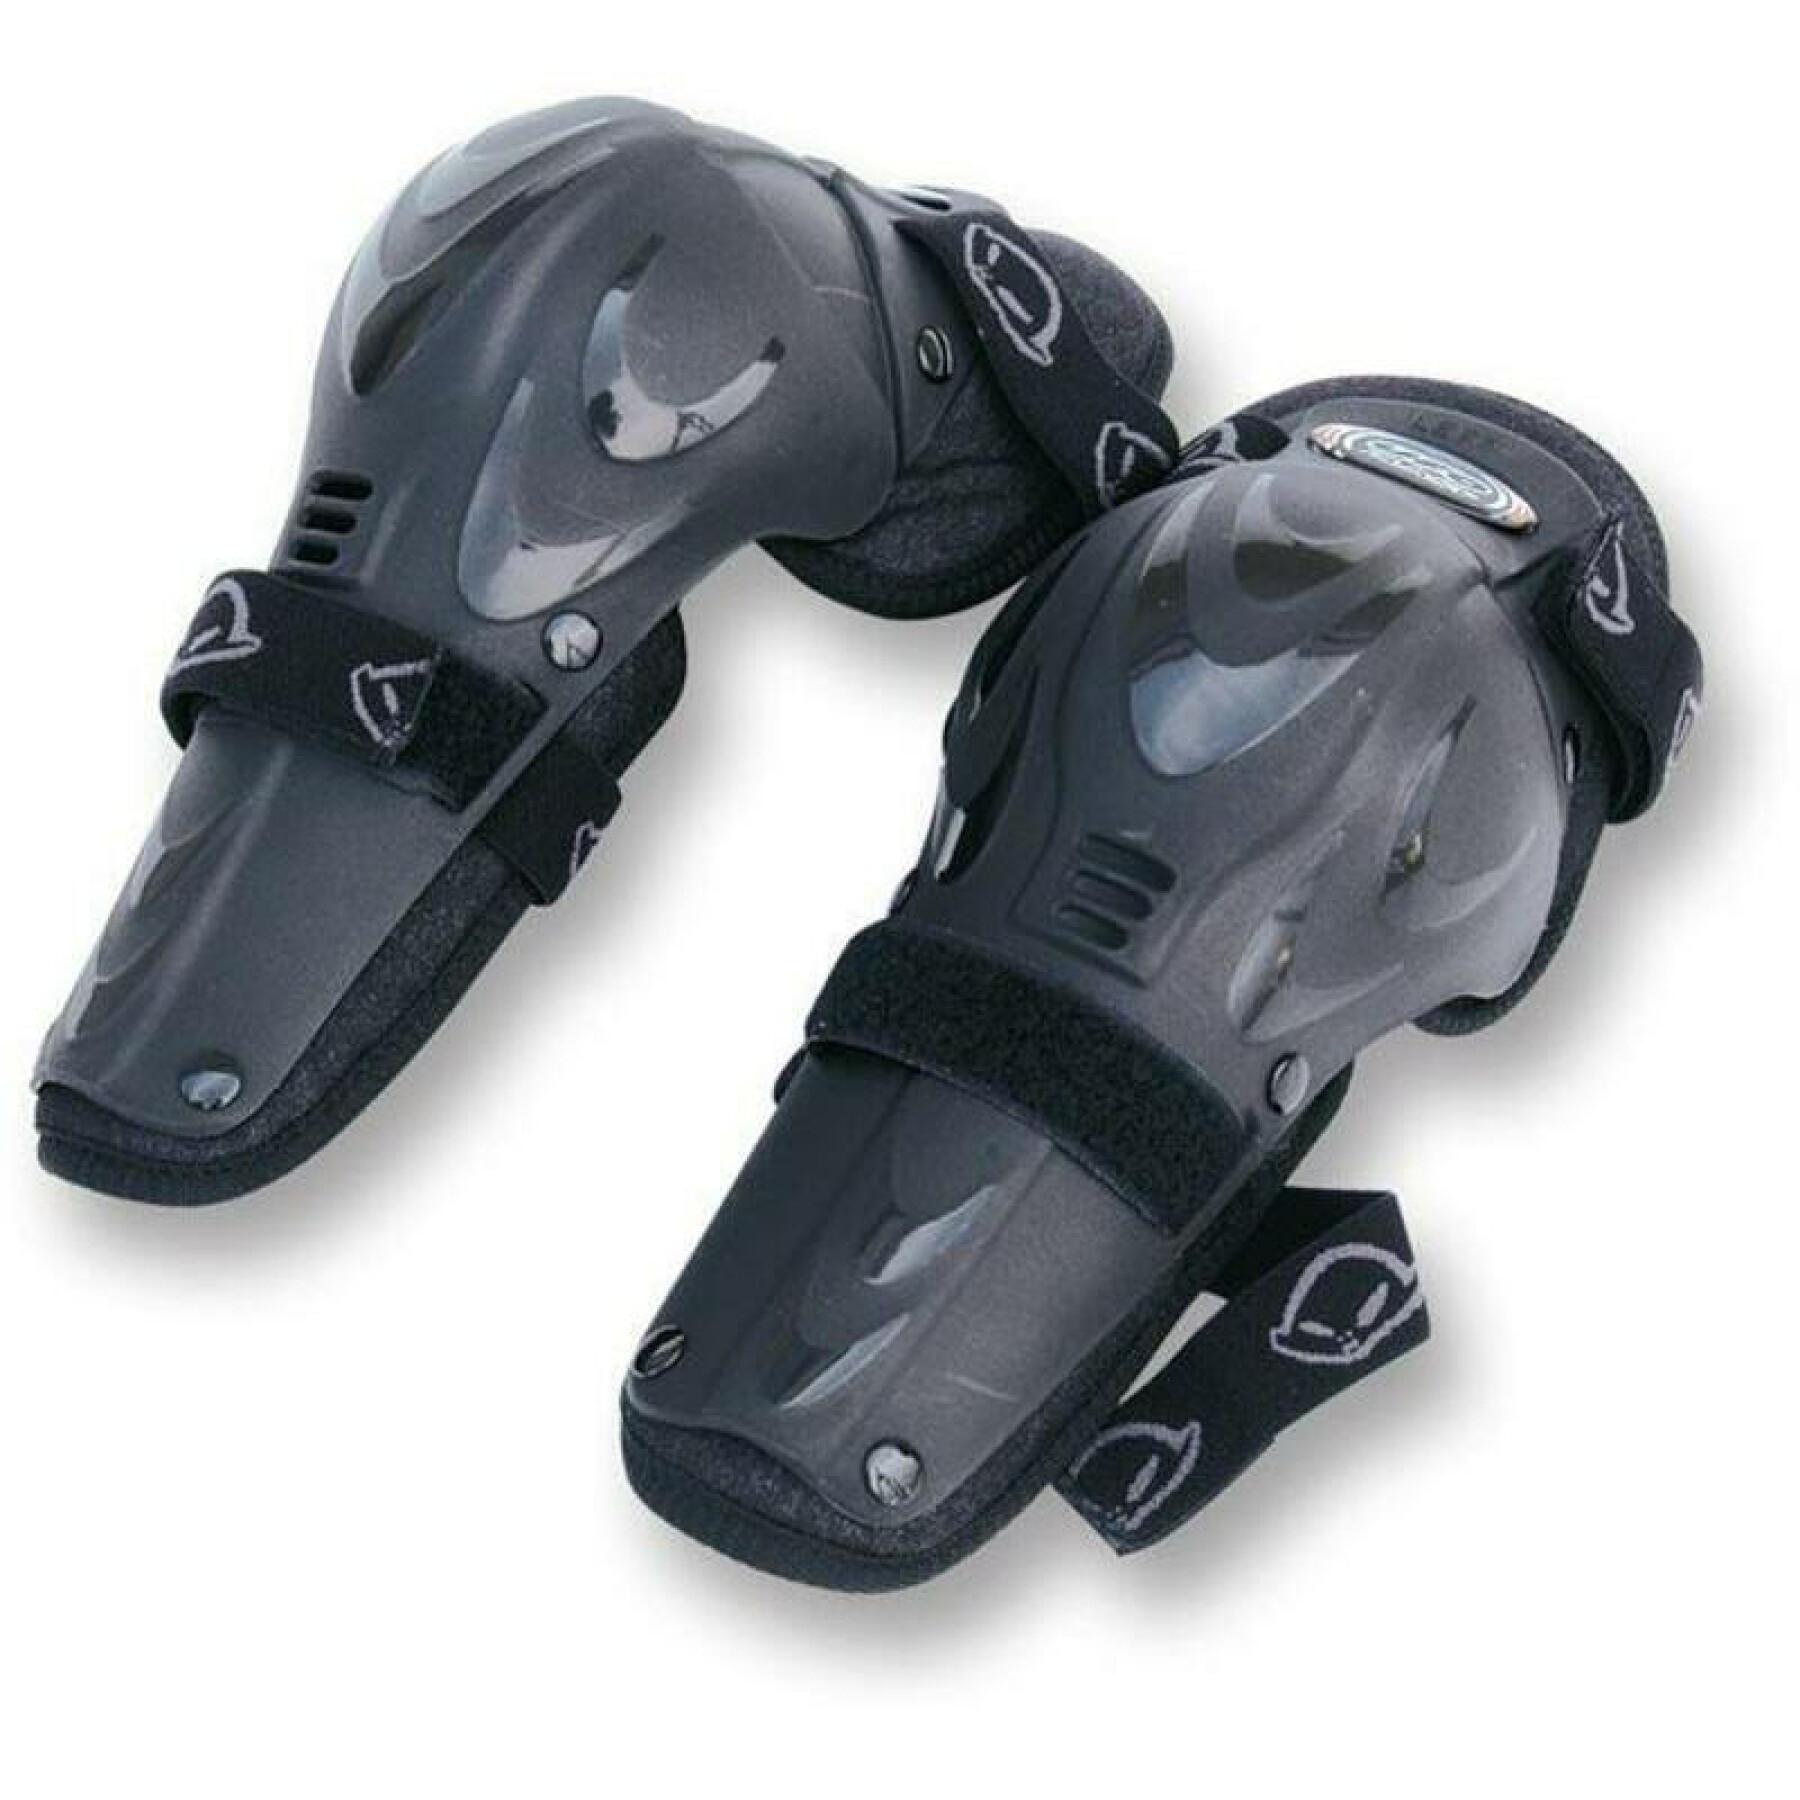 Child's articulated motorcycle knee brace UFO